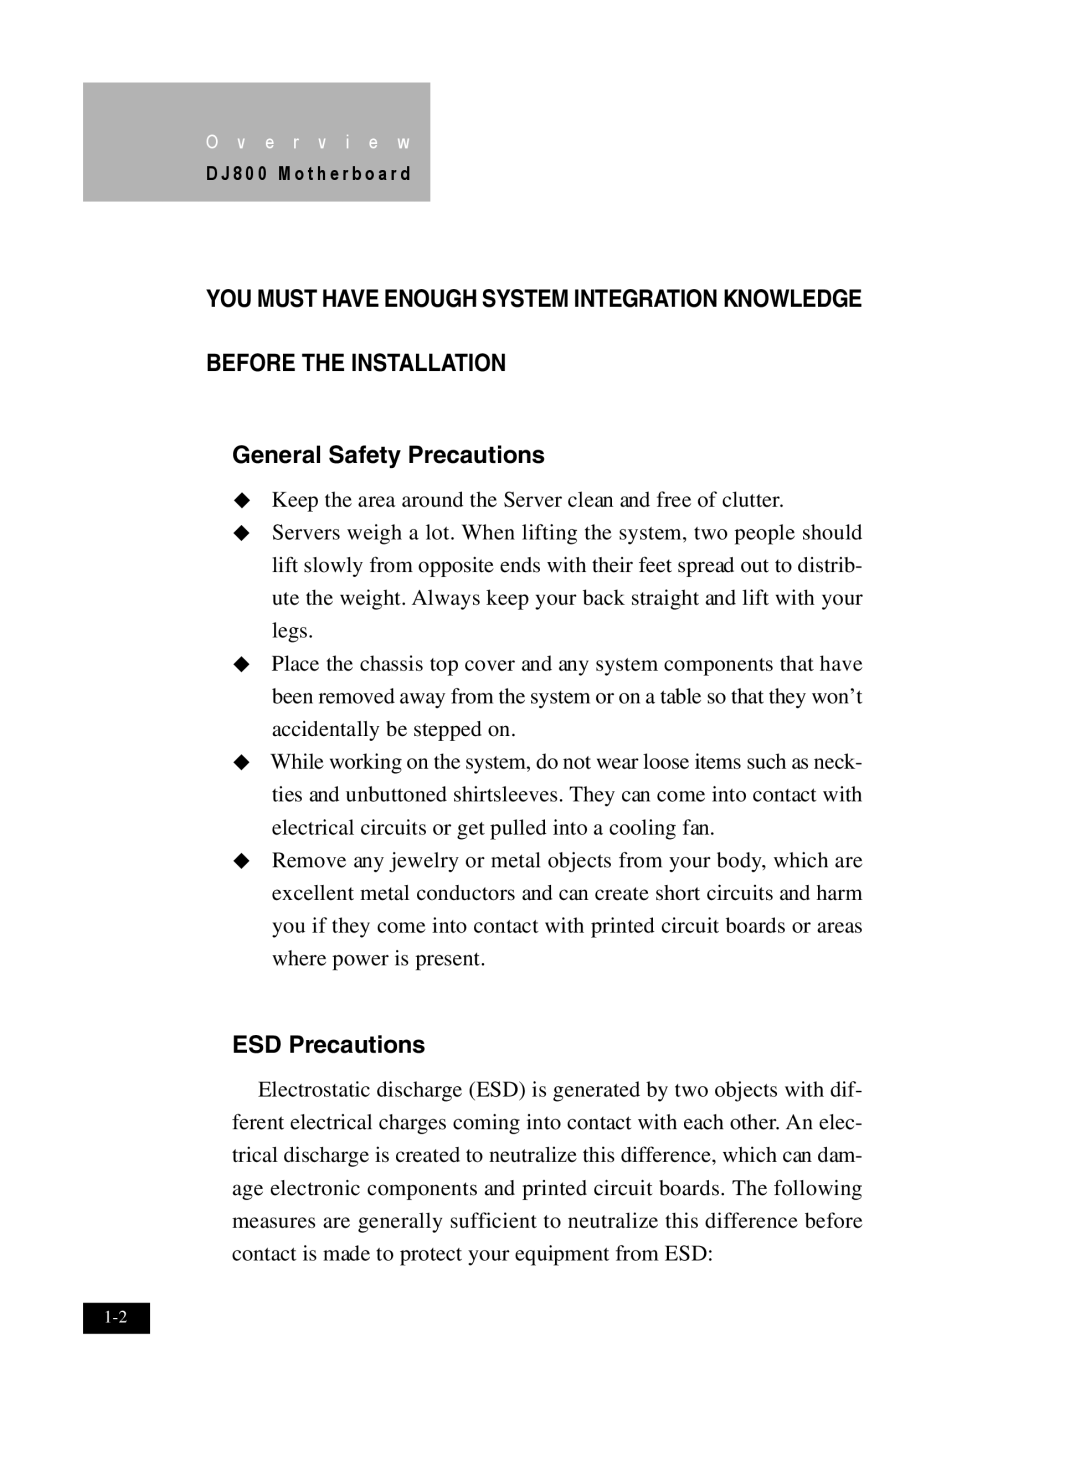 IBM DJ800 user manual You Must Have Enough System Integration Knowledge, BEFORE THE INSTALLATION General Safety Precautions 